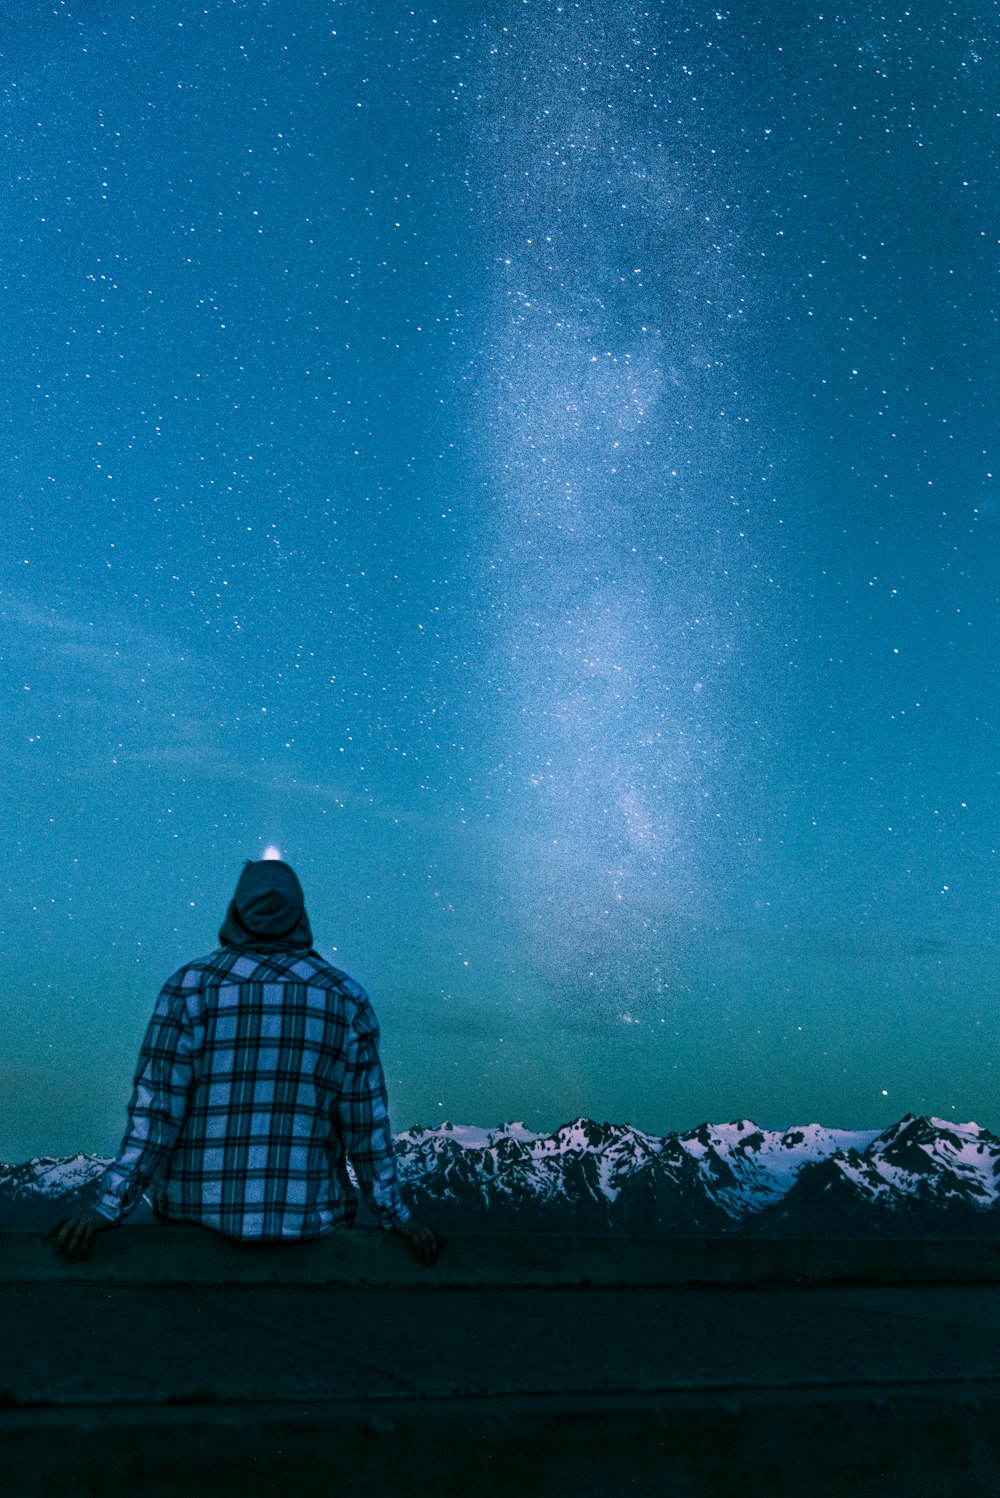 Looking At Stars Pictures Download Free Images On Unsplash